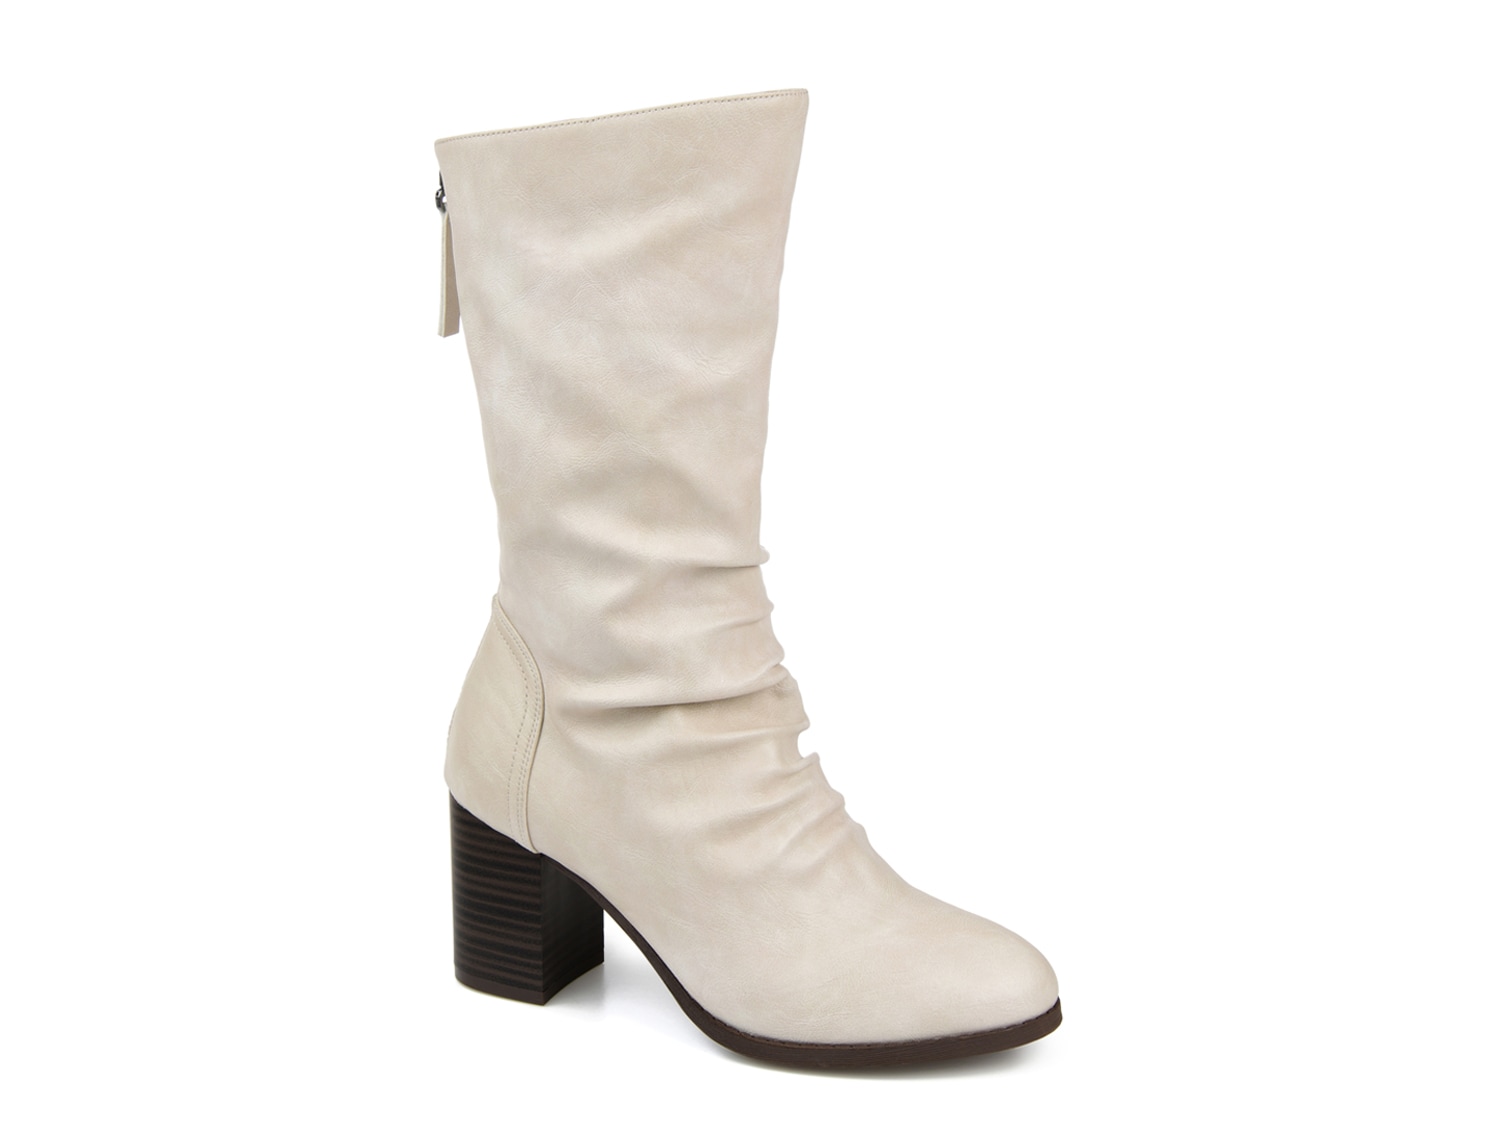 Journee Collection Sequoia Boot - Free Shipping | DSW